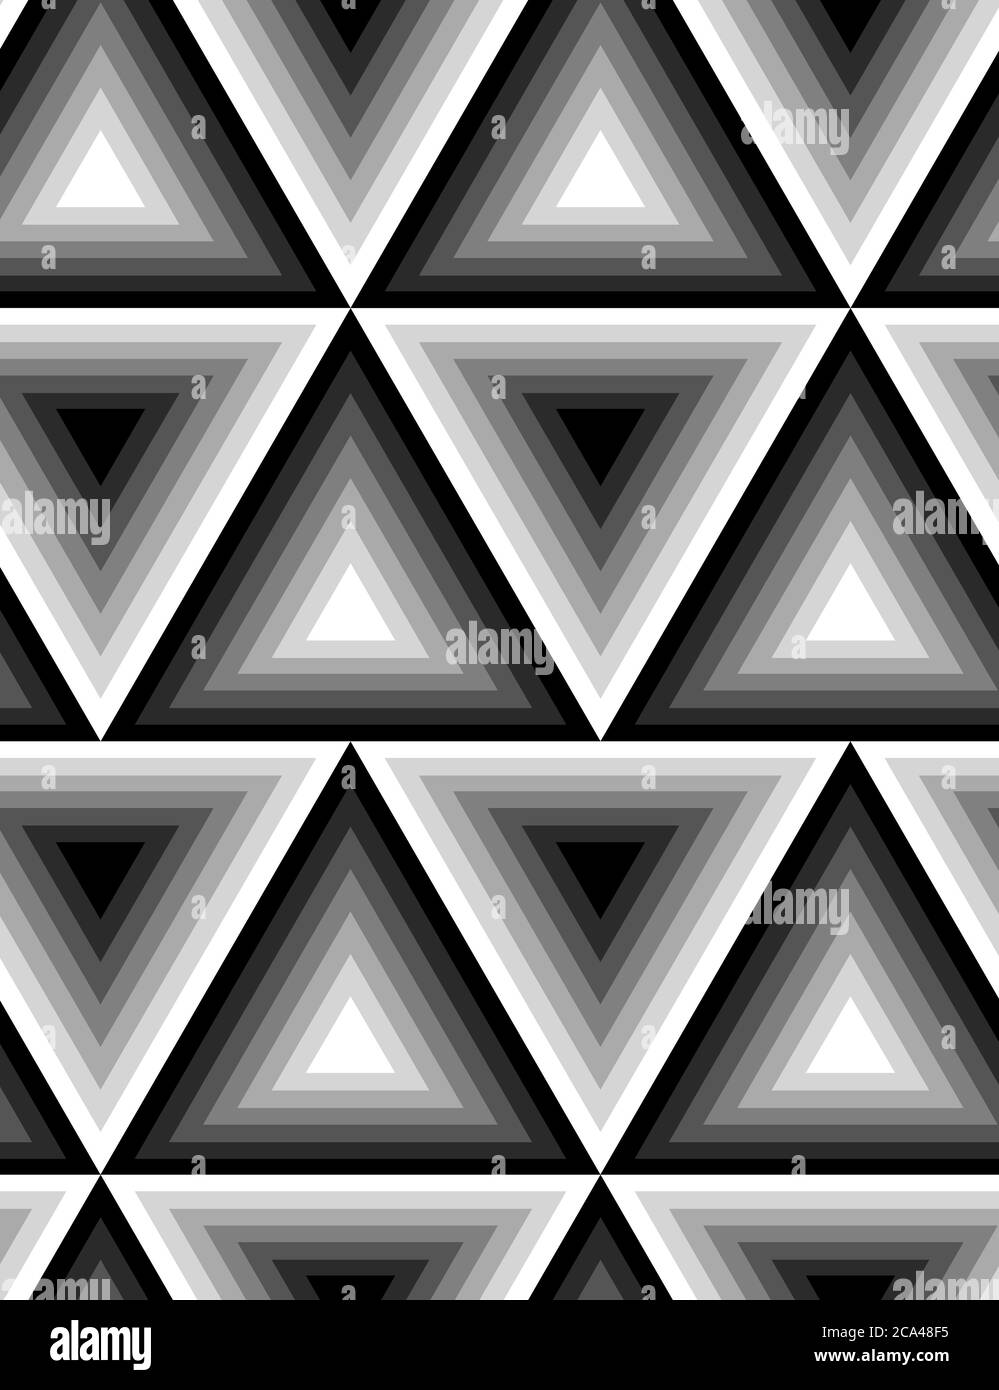 Seamless black and white texture with triangles. Vector background for your design. Stock Vector